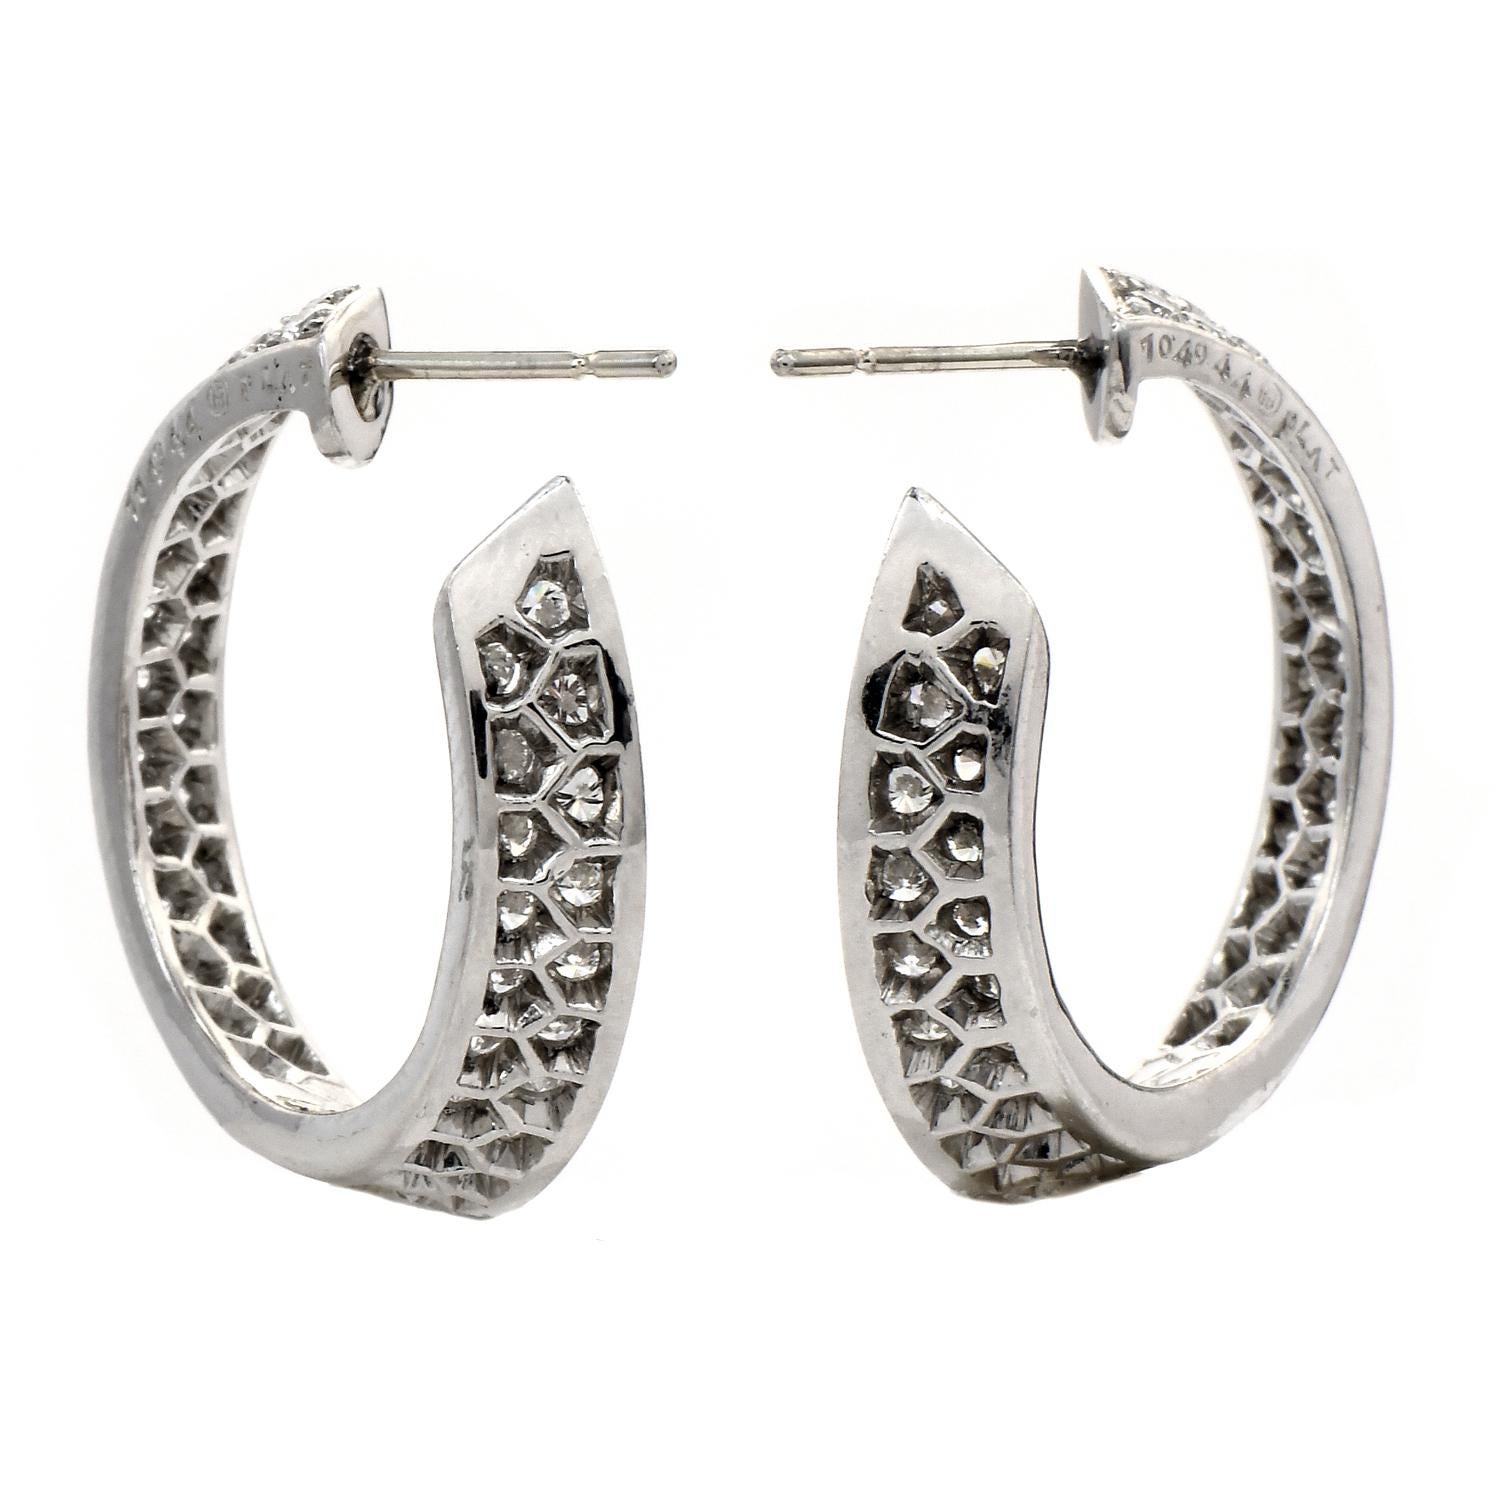 Oscar Heyman Diamond Platinum Inside Outside Hoop Earrings In Excellent Condition For Sale In Miami, FL